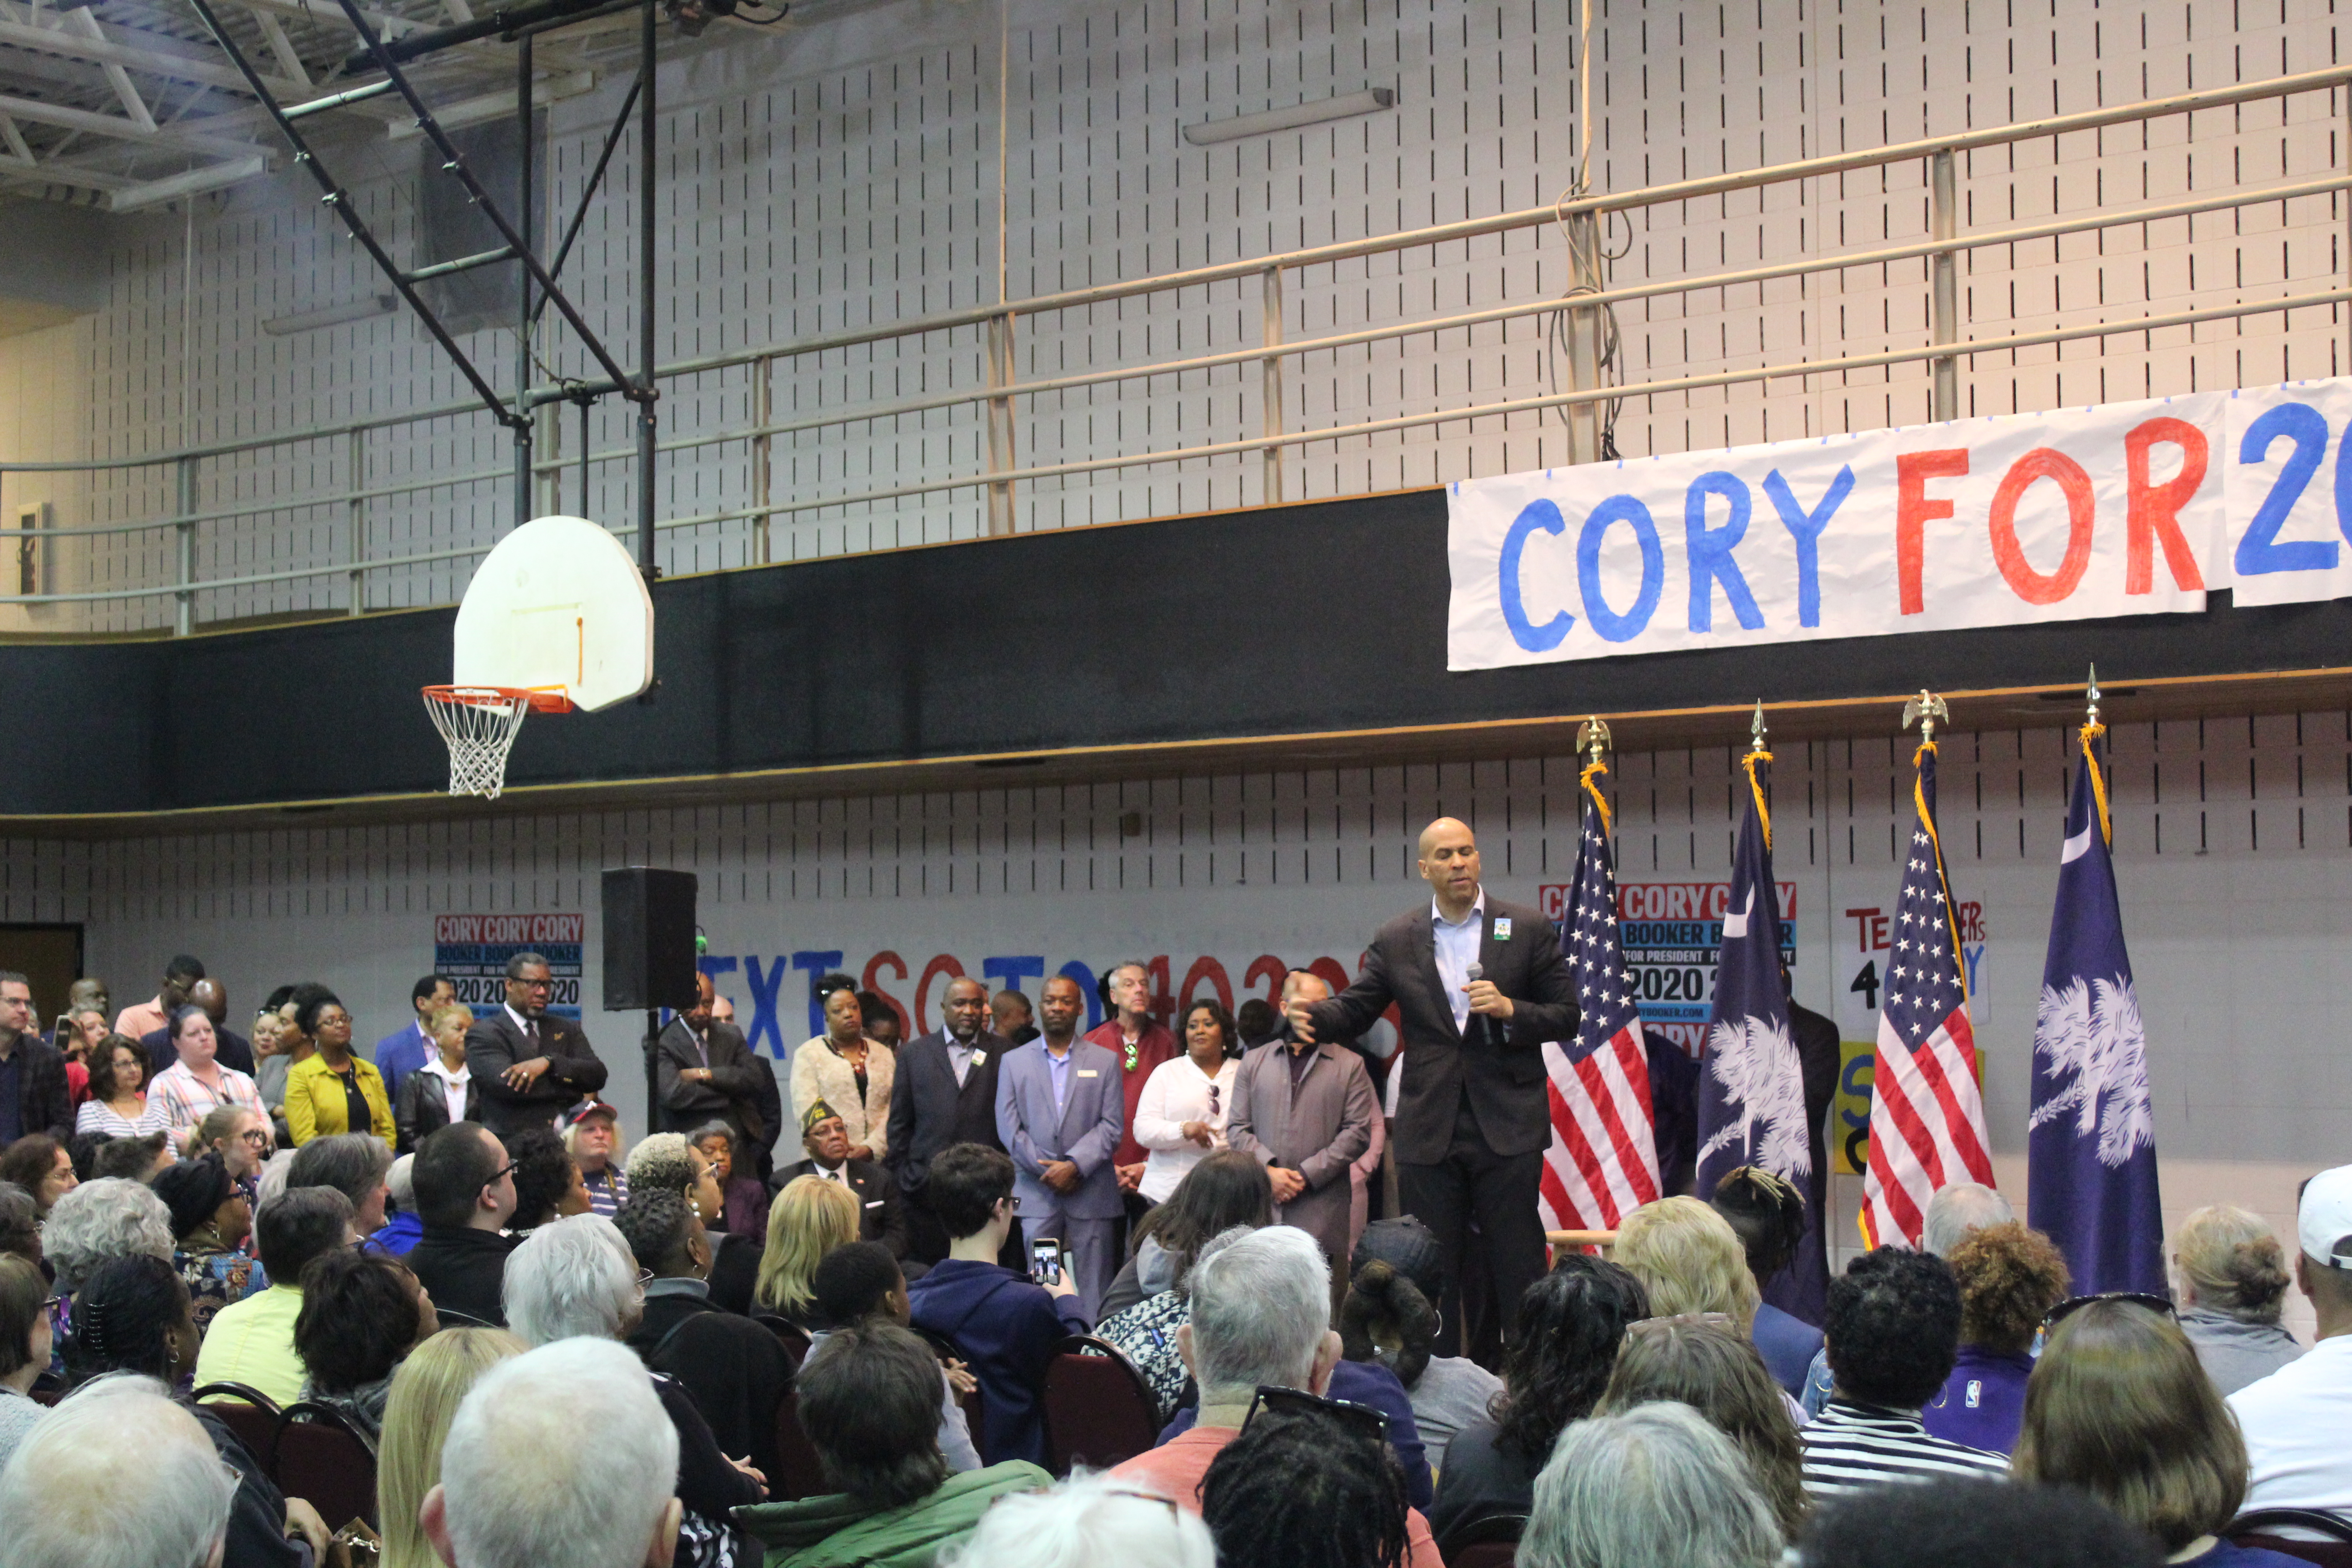 Student journalists talk to Cory Booker